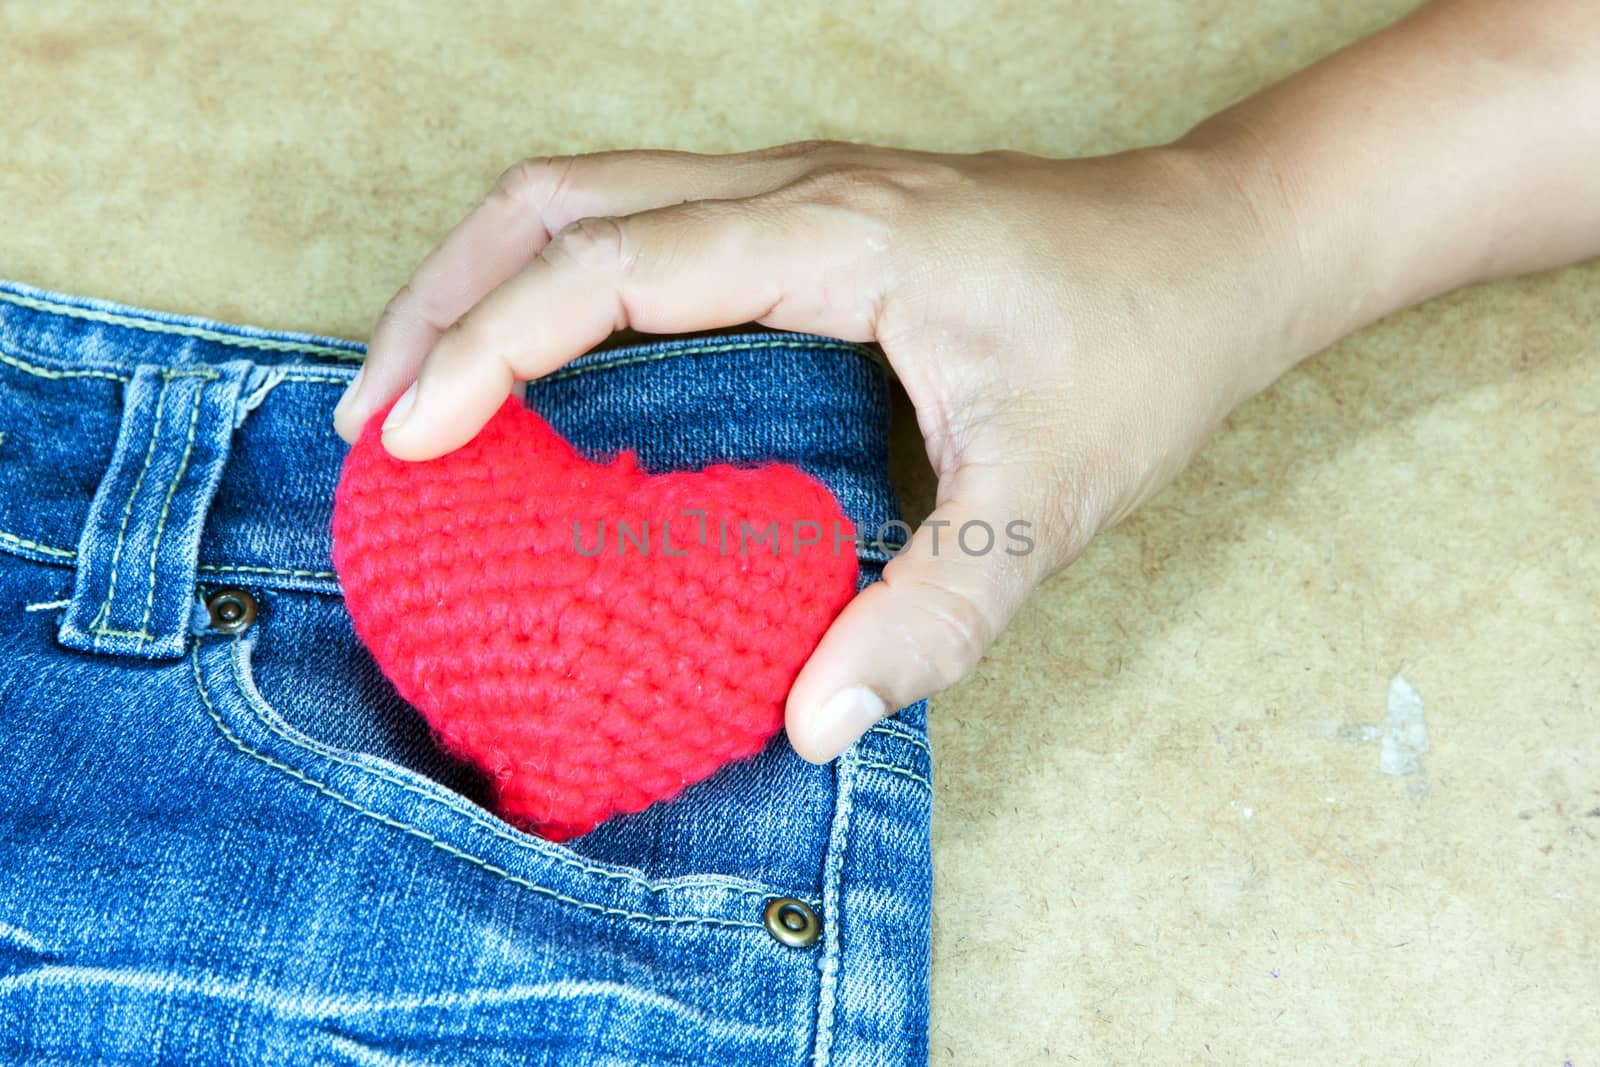 Women took the crochet heart red color out of a blue jeans pocket.